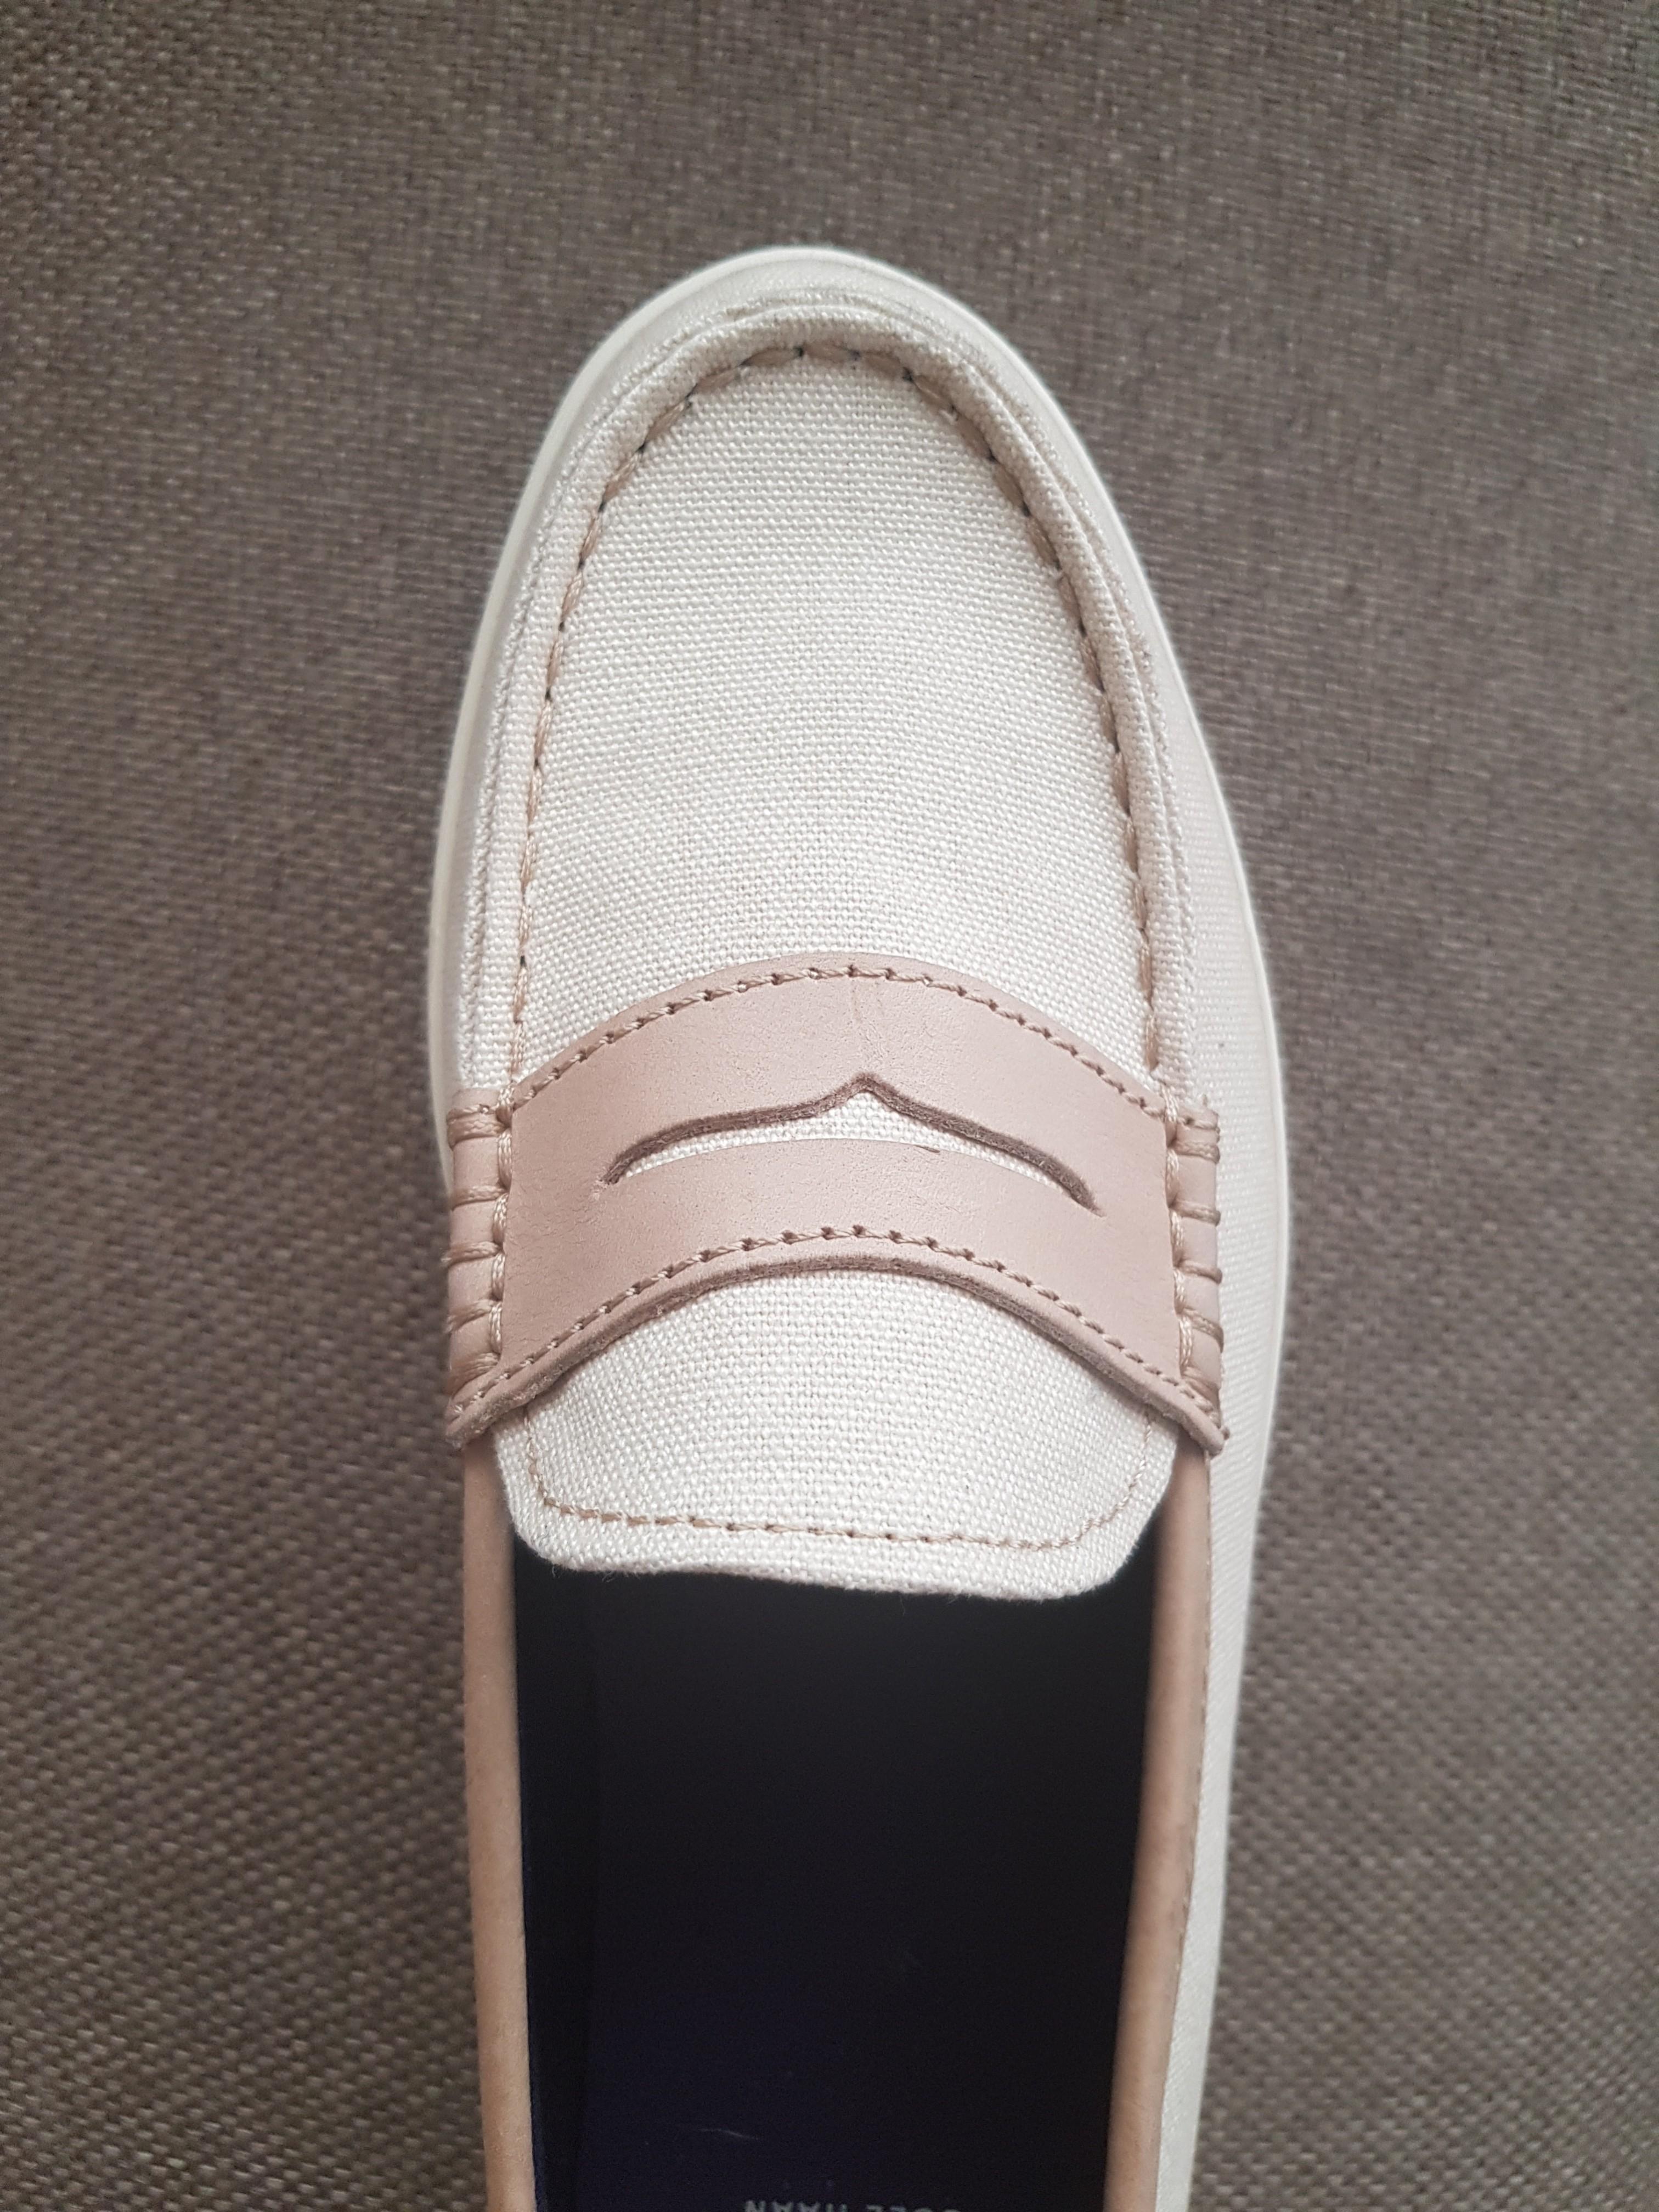 cole haan pink loafers